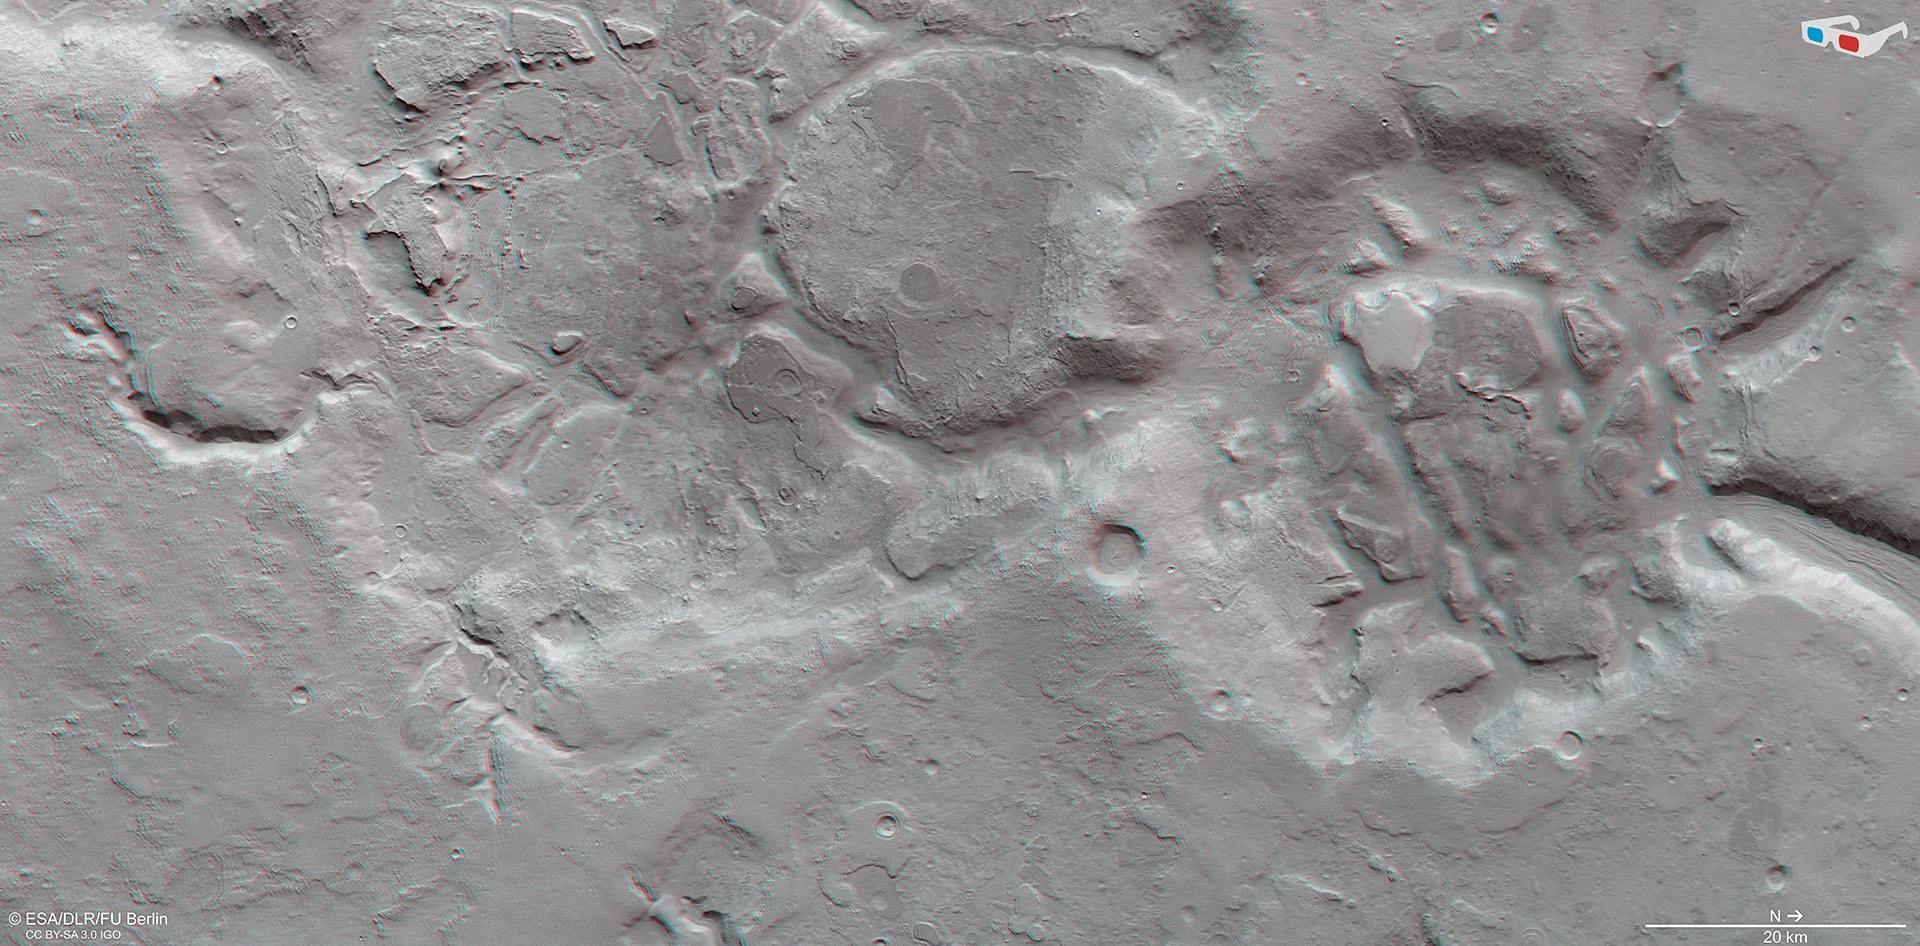 3D view of a part of the Nilosyrtis Mensae region